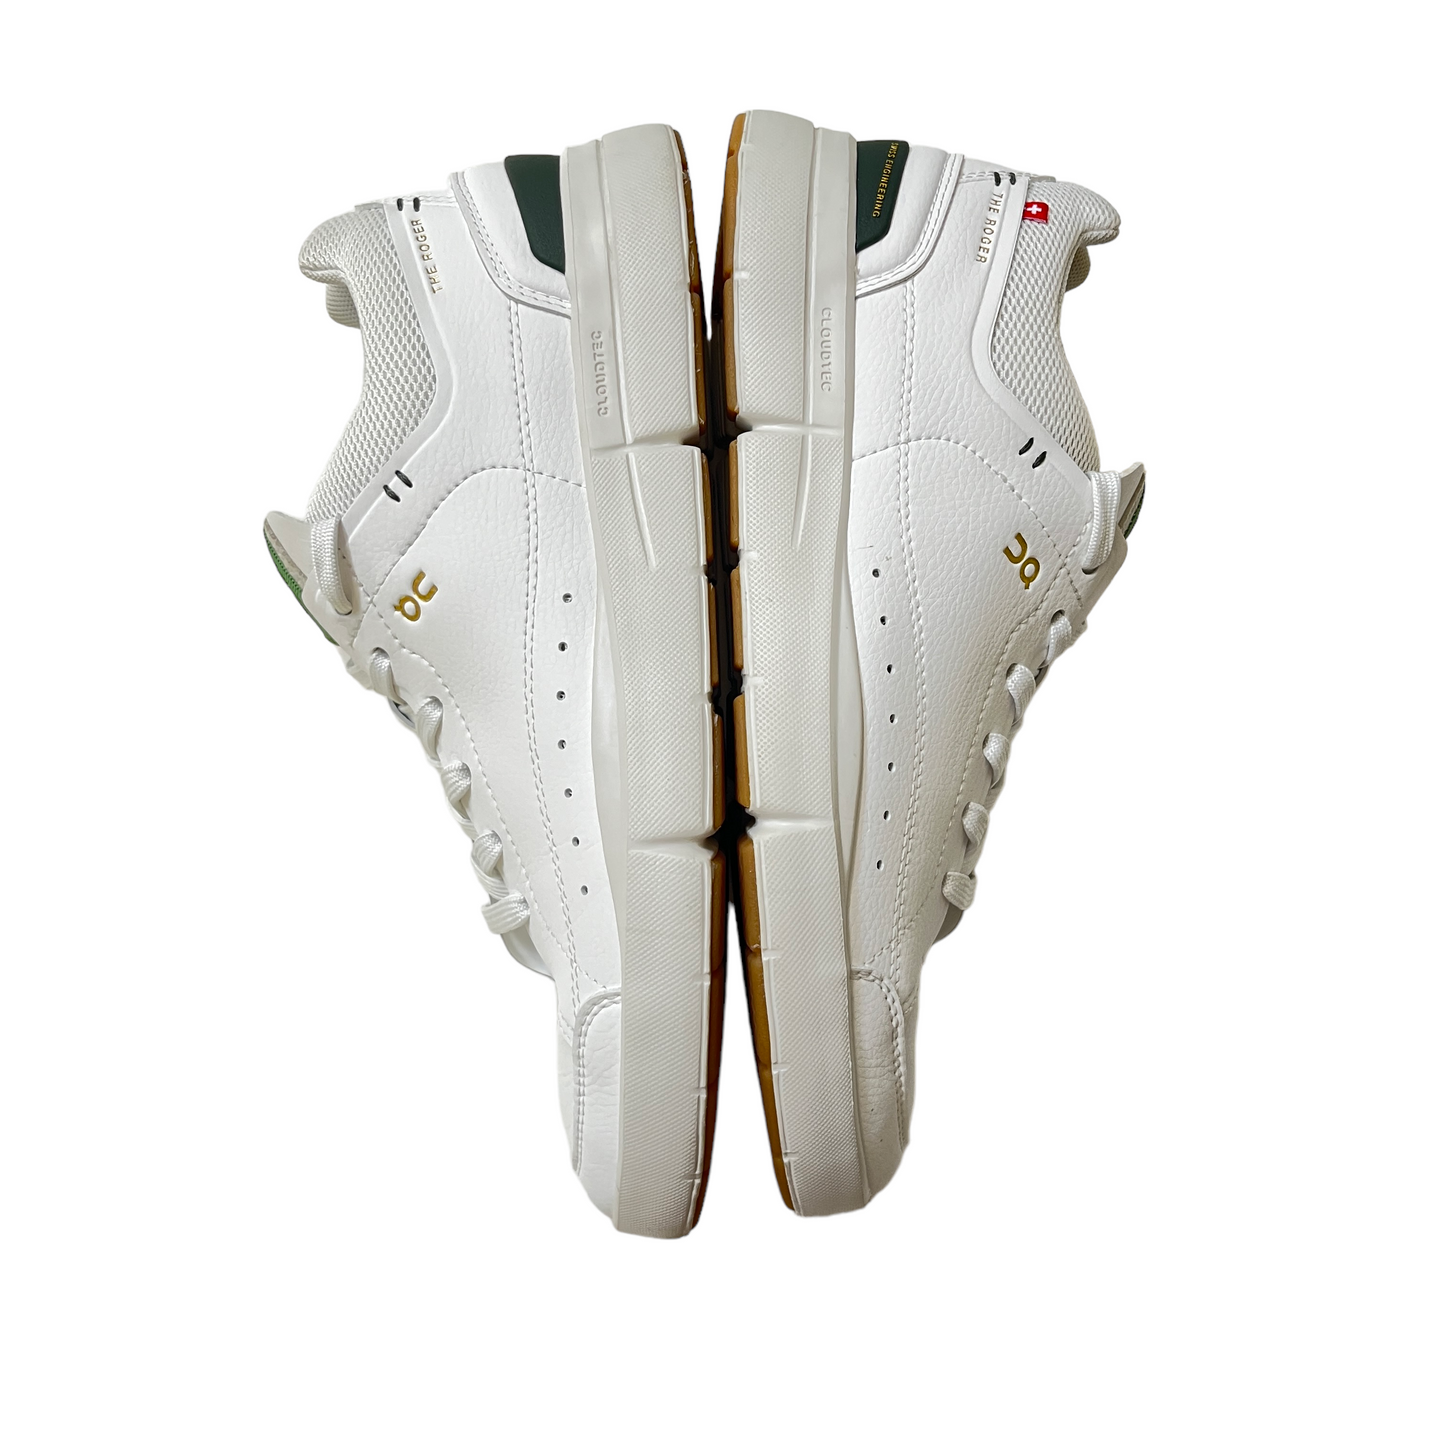 On Roger Centre Court Sneaker in White & Sage